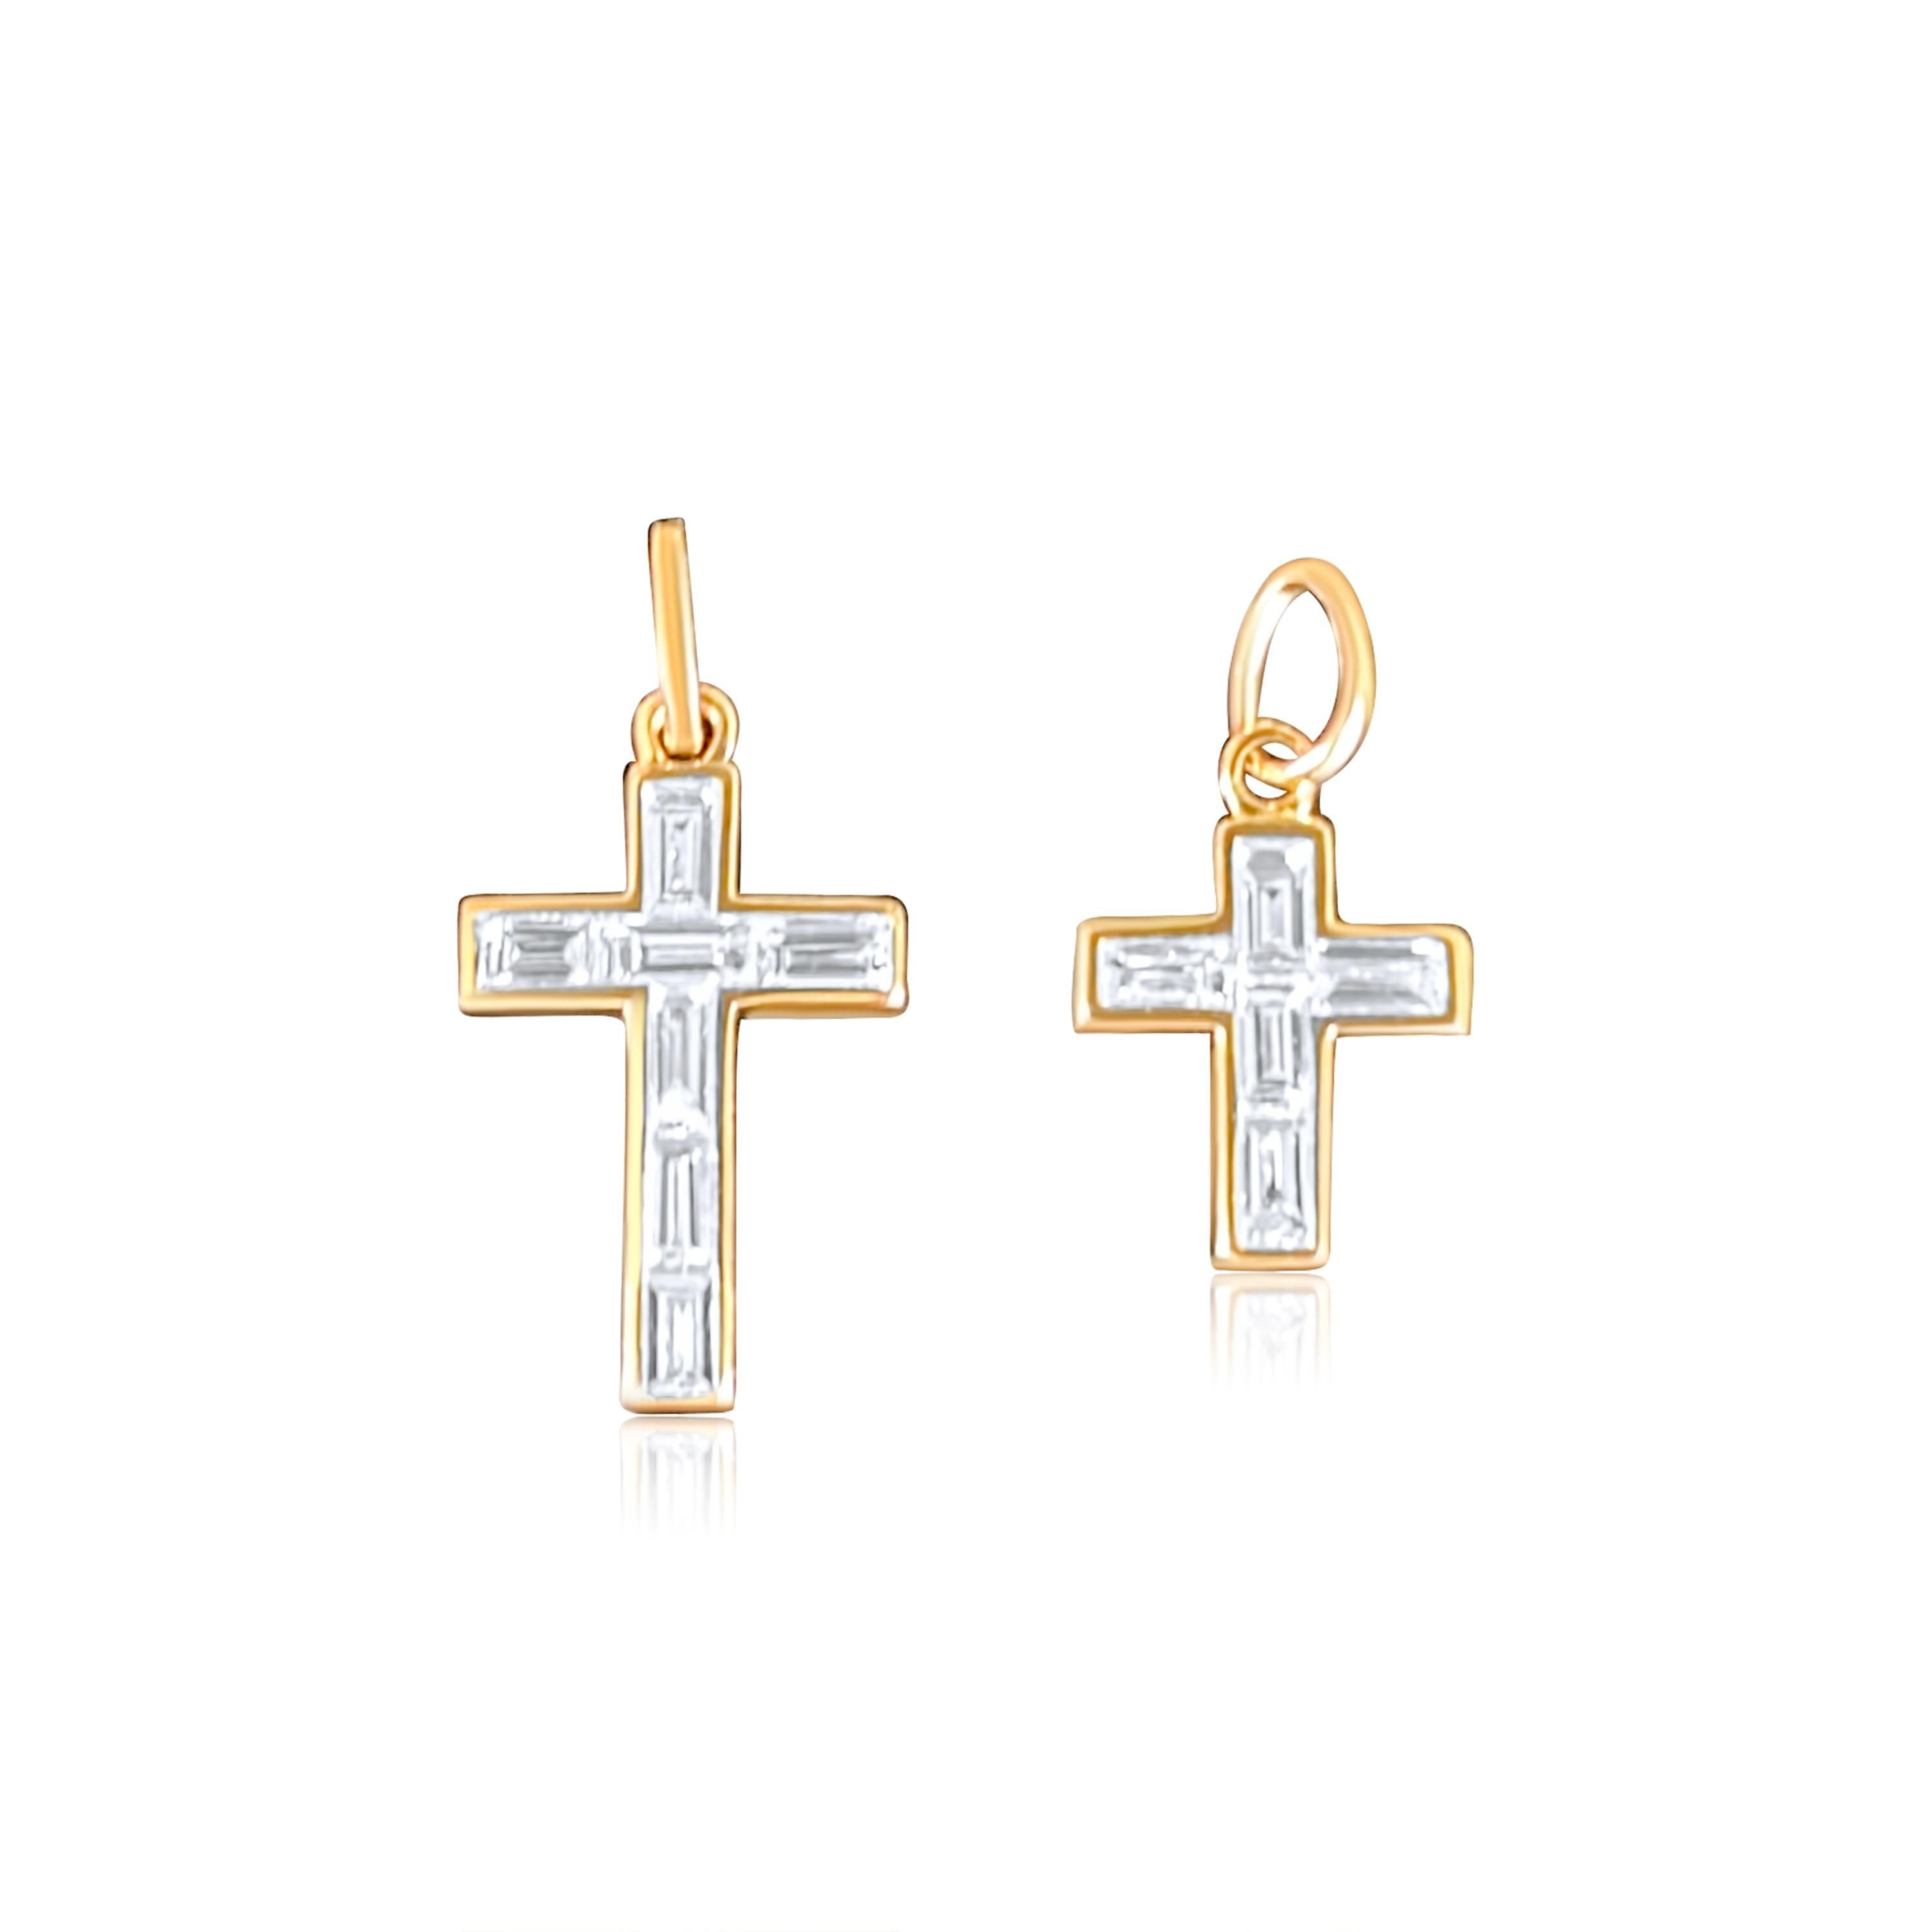 Add a bit of luxury and edginess with this diamond baguette cross charm. These Cross charm pendant comes in two sizes, set in solid 14k yellow gold. Can’t find a color you like? Please reach out for addition variations made just for you.

Pendant